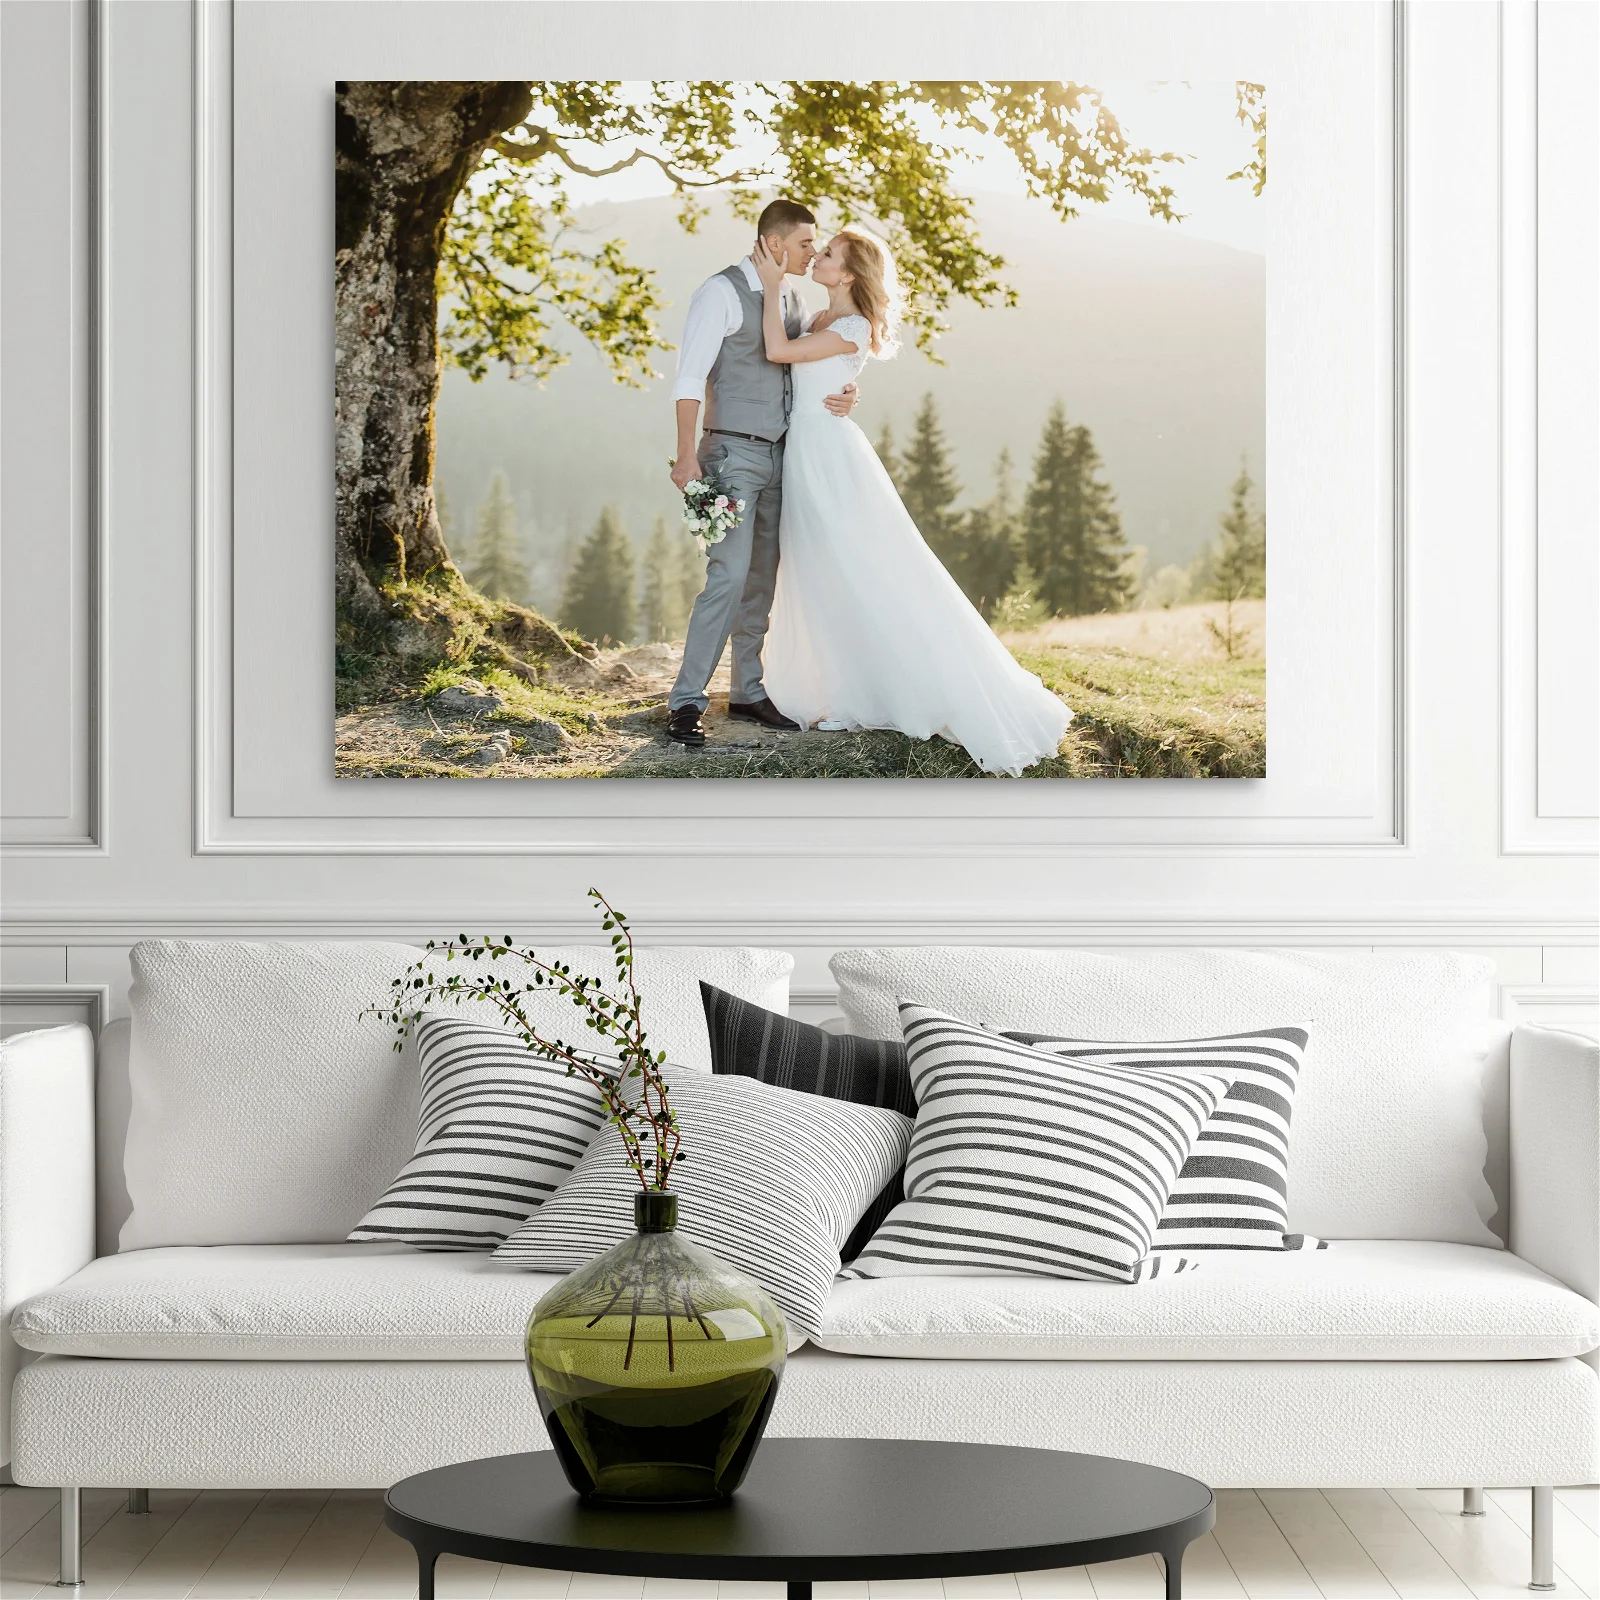 Canvas Prints - Your Pictures to Canvas